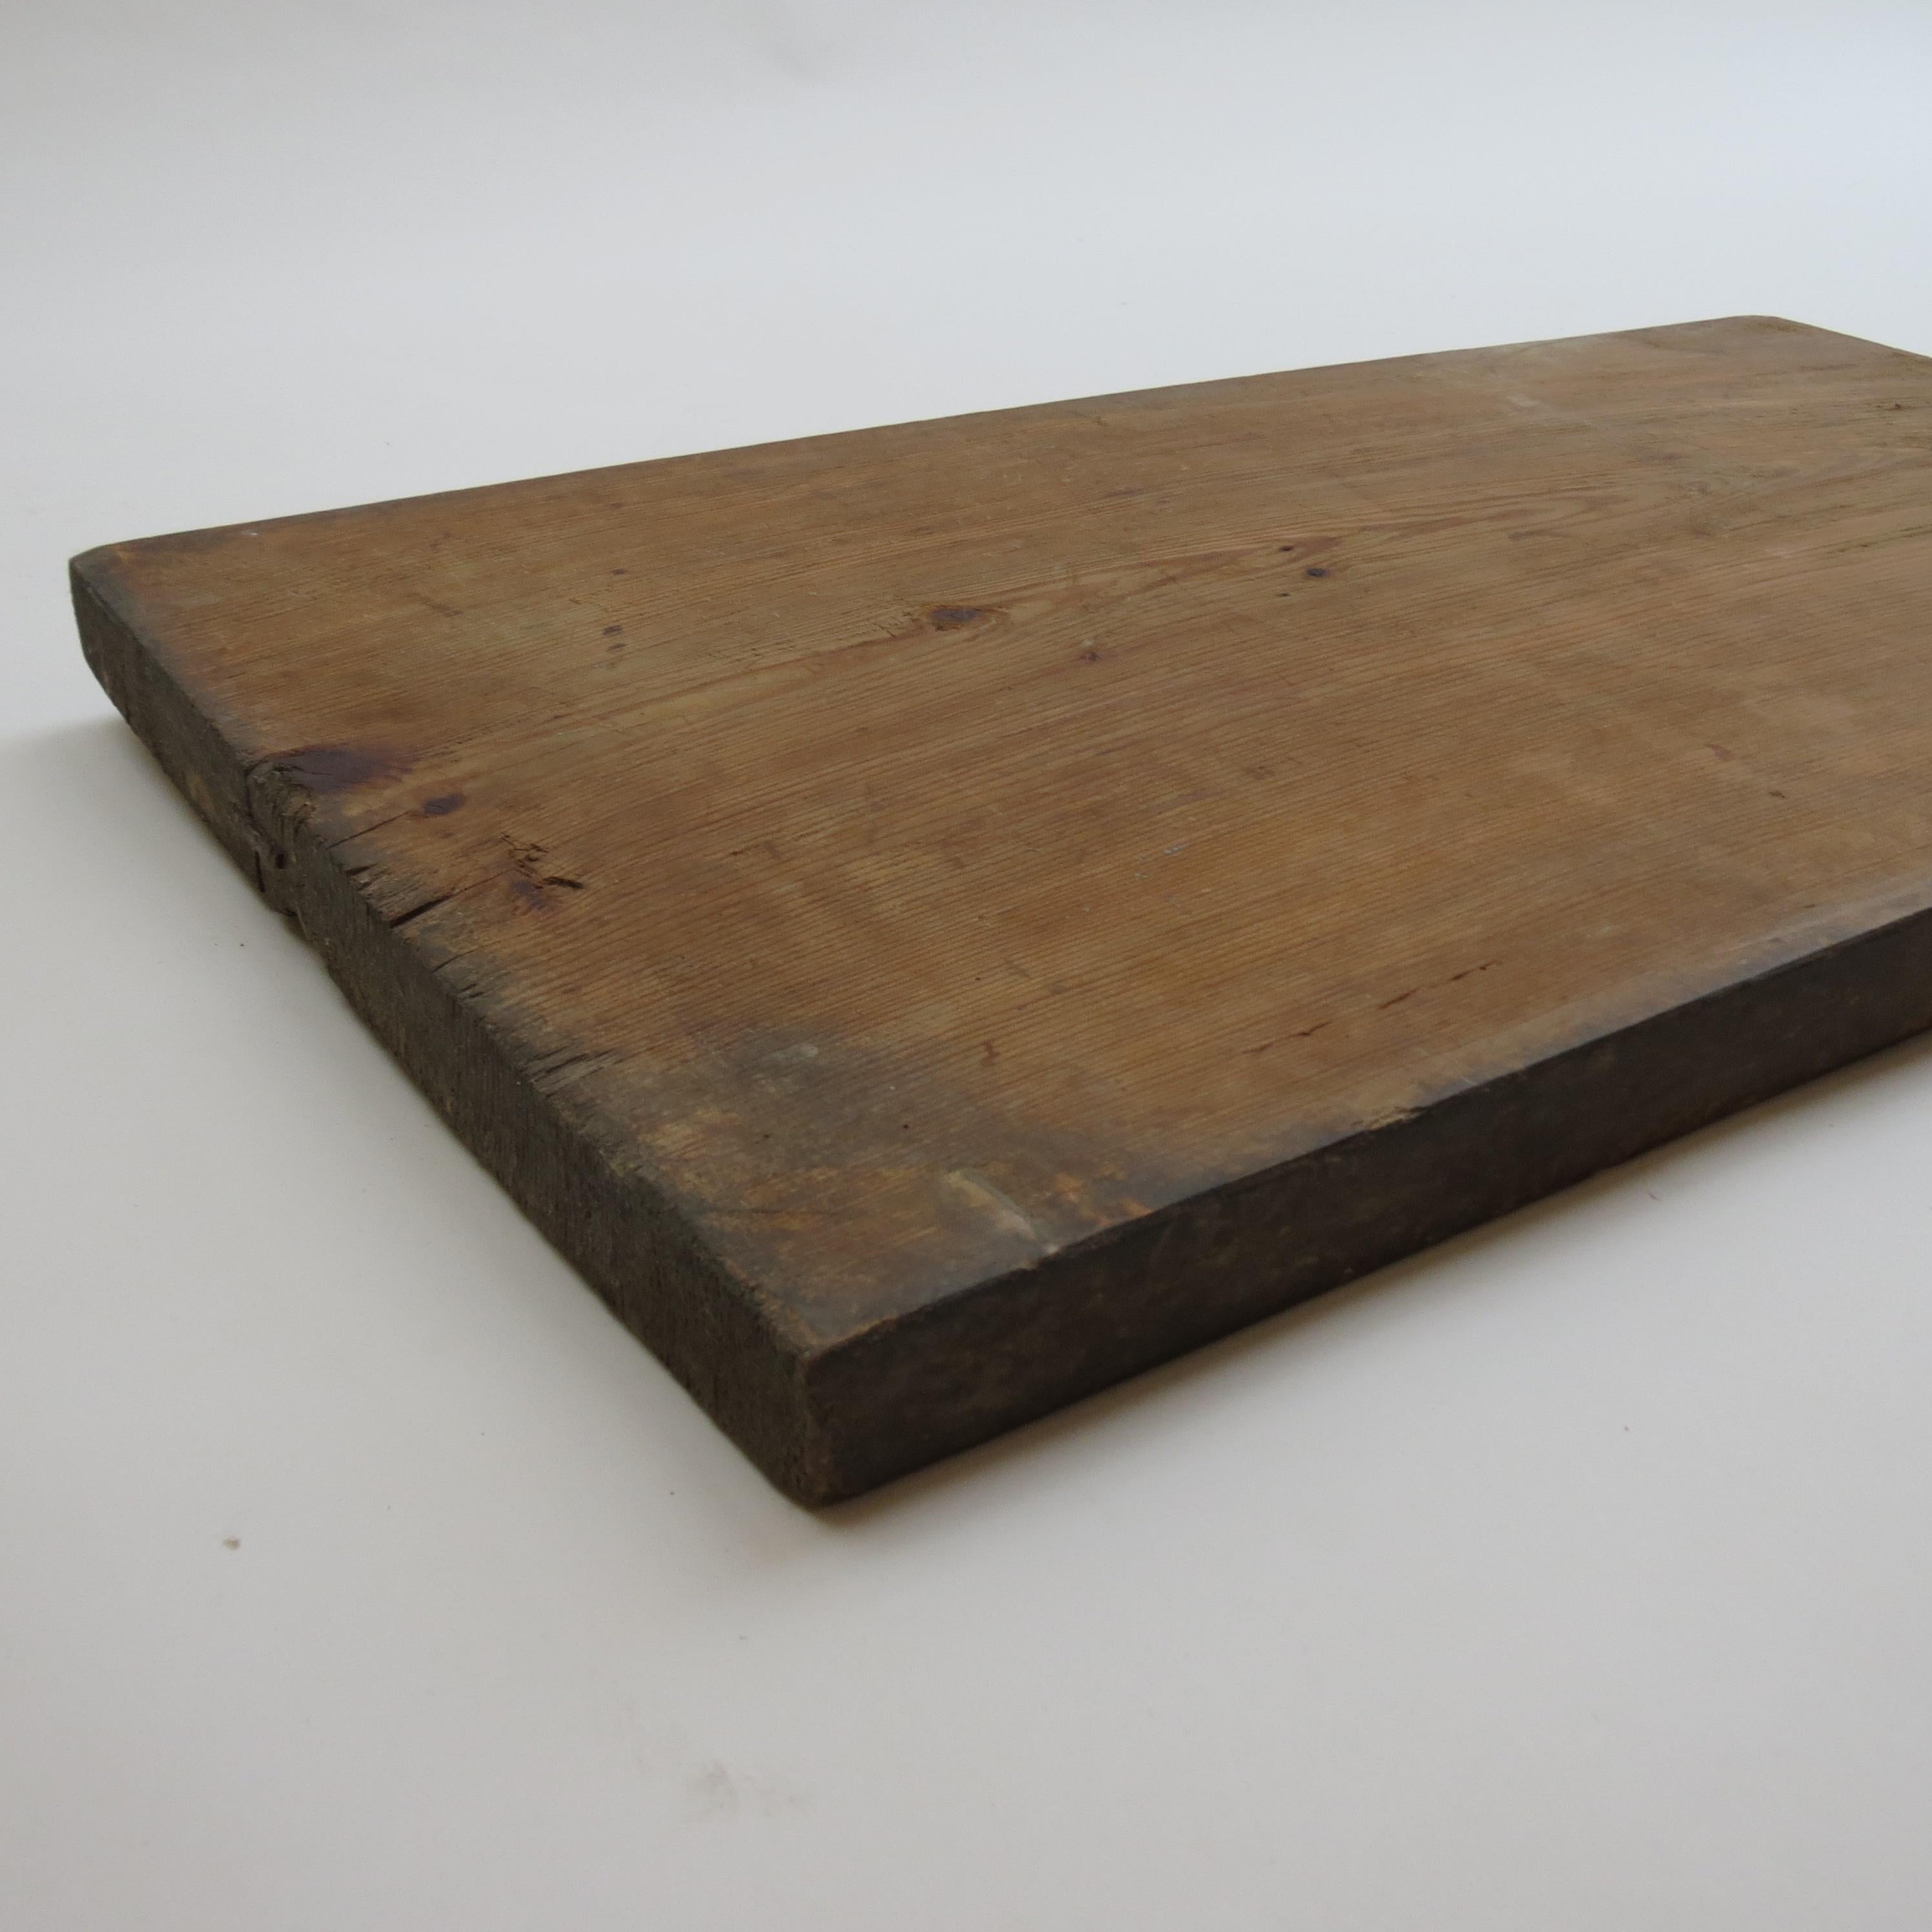 Large vintage wooden chopping noodle board Japanese origin

Very large vintage wooden chopping board originally used as for chopping noodles. Heavily distressed and patinated. 

Measures: 76cm x 45cm x 3.5cm thick 
st1163.



  